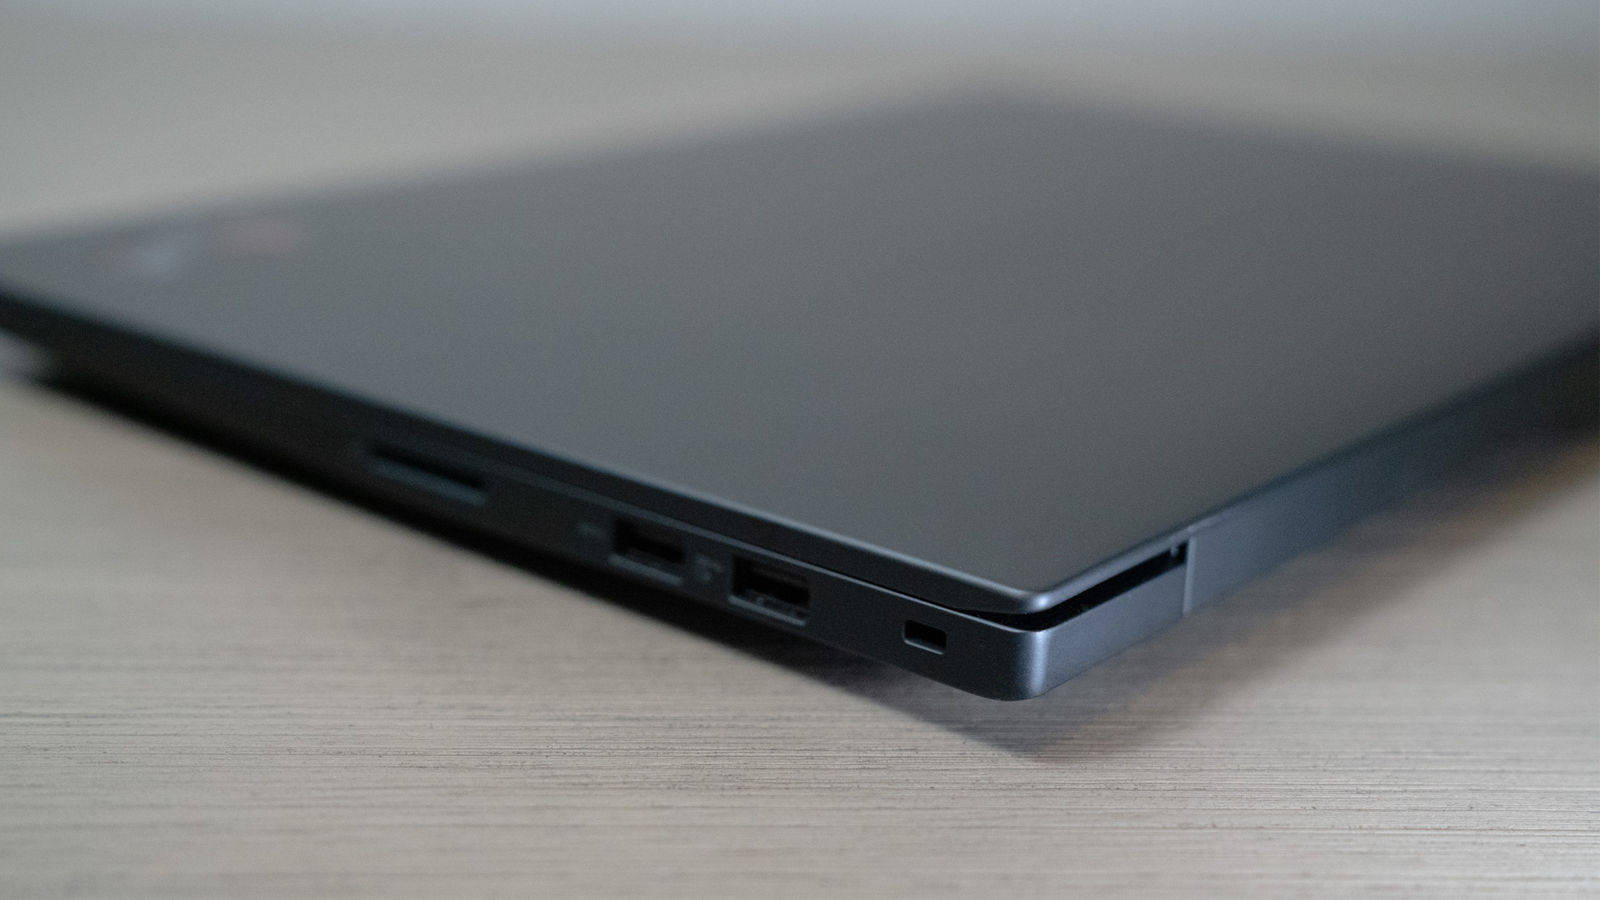 The back left corner of the Lenovo Gen 4 laptop with the lid closed